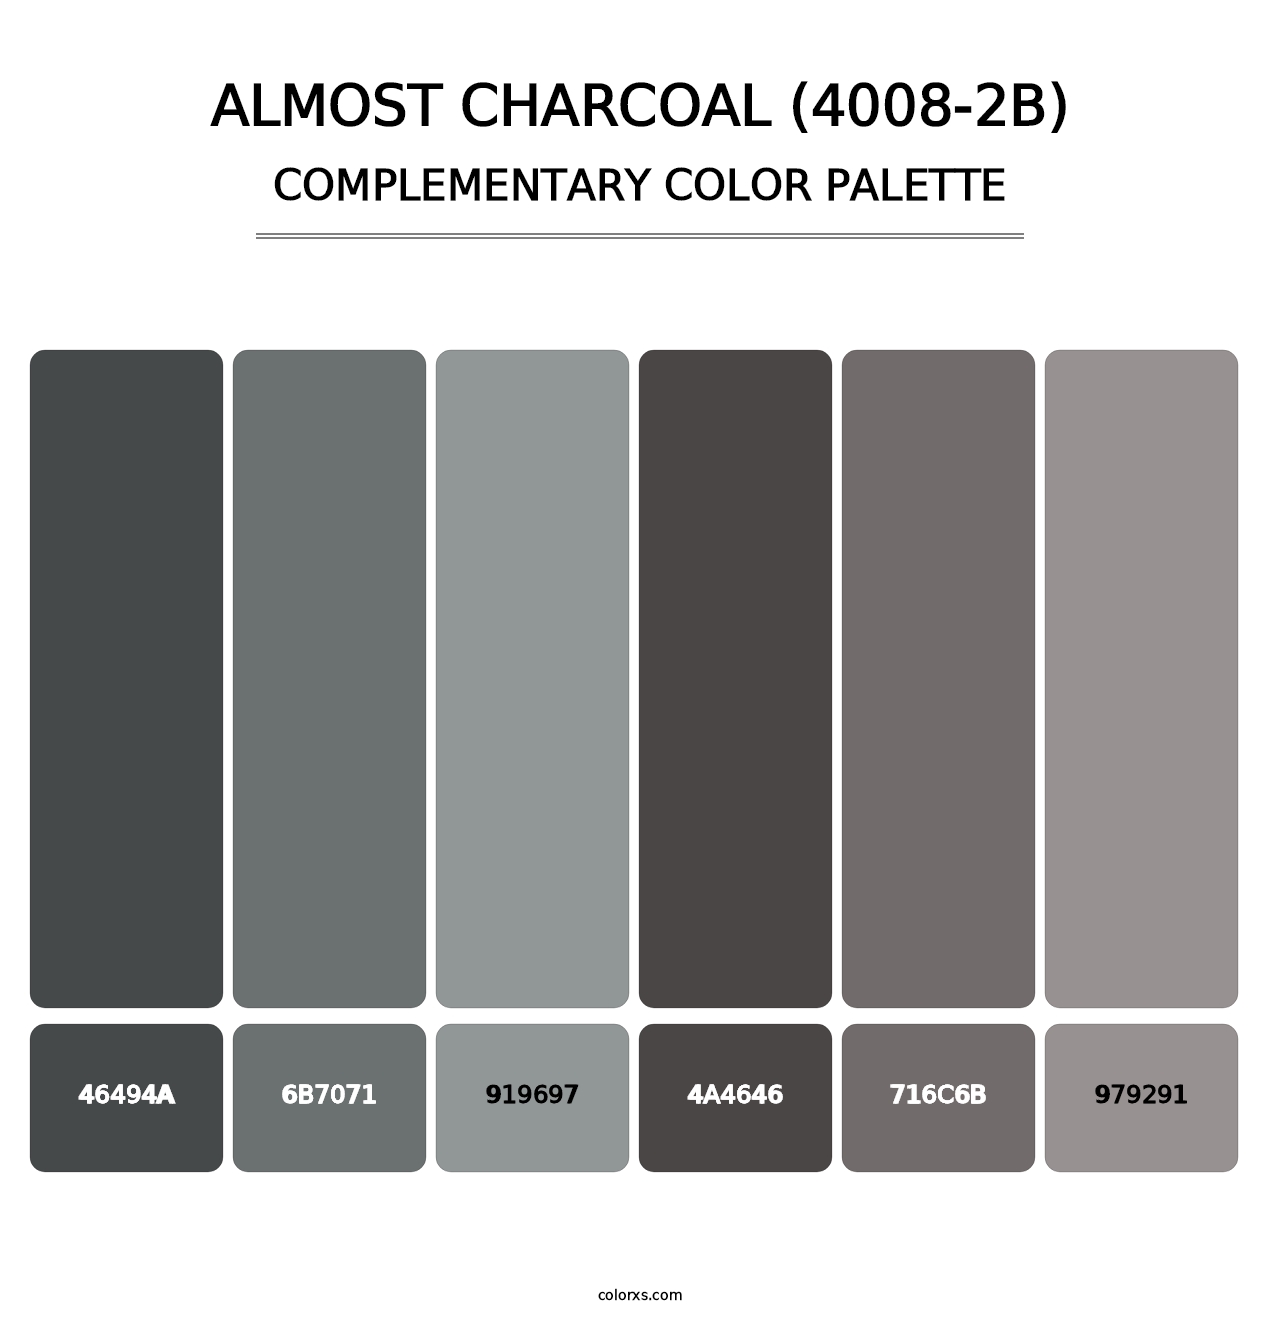 Almost Charcoal (4008-2B) - Complementary Color Palette